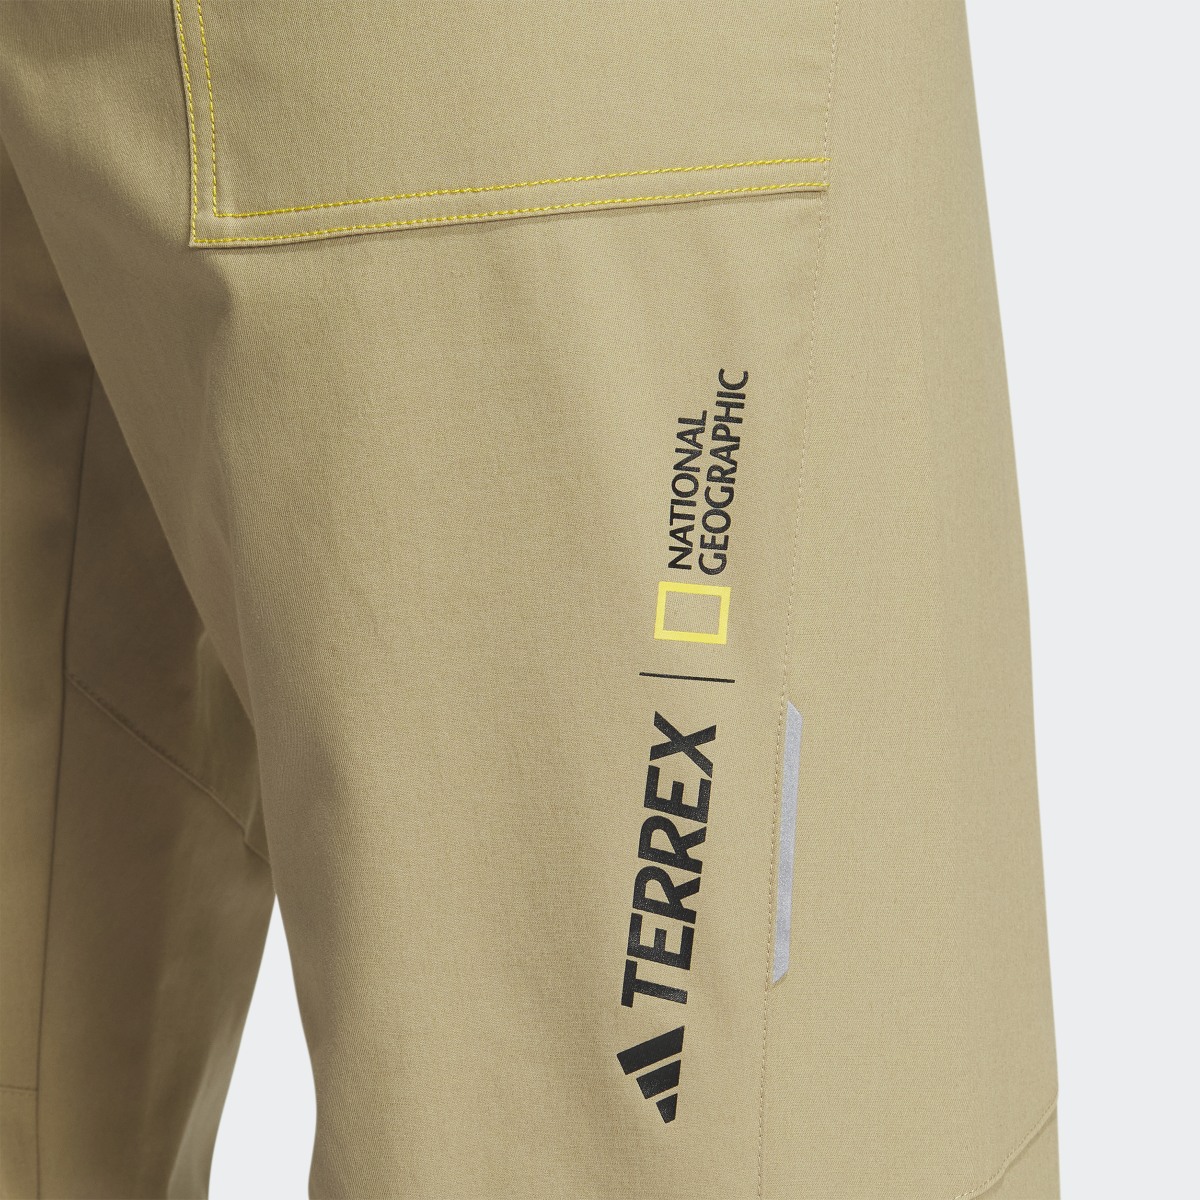 Adidas National Geographic Twill Trousers. 6